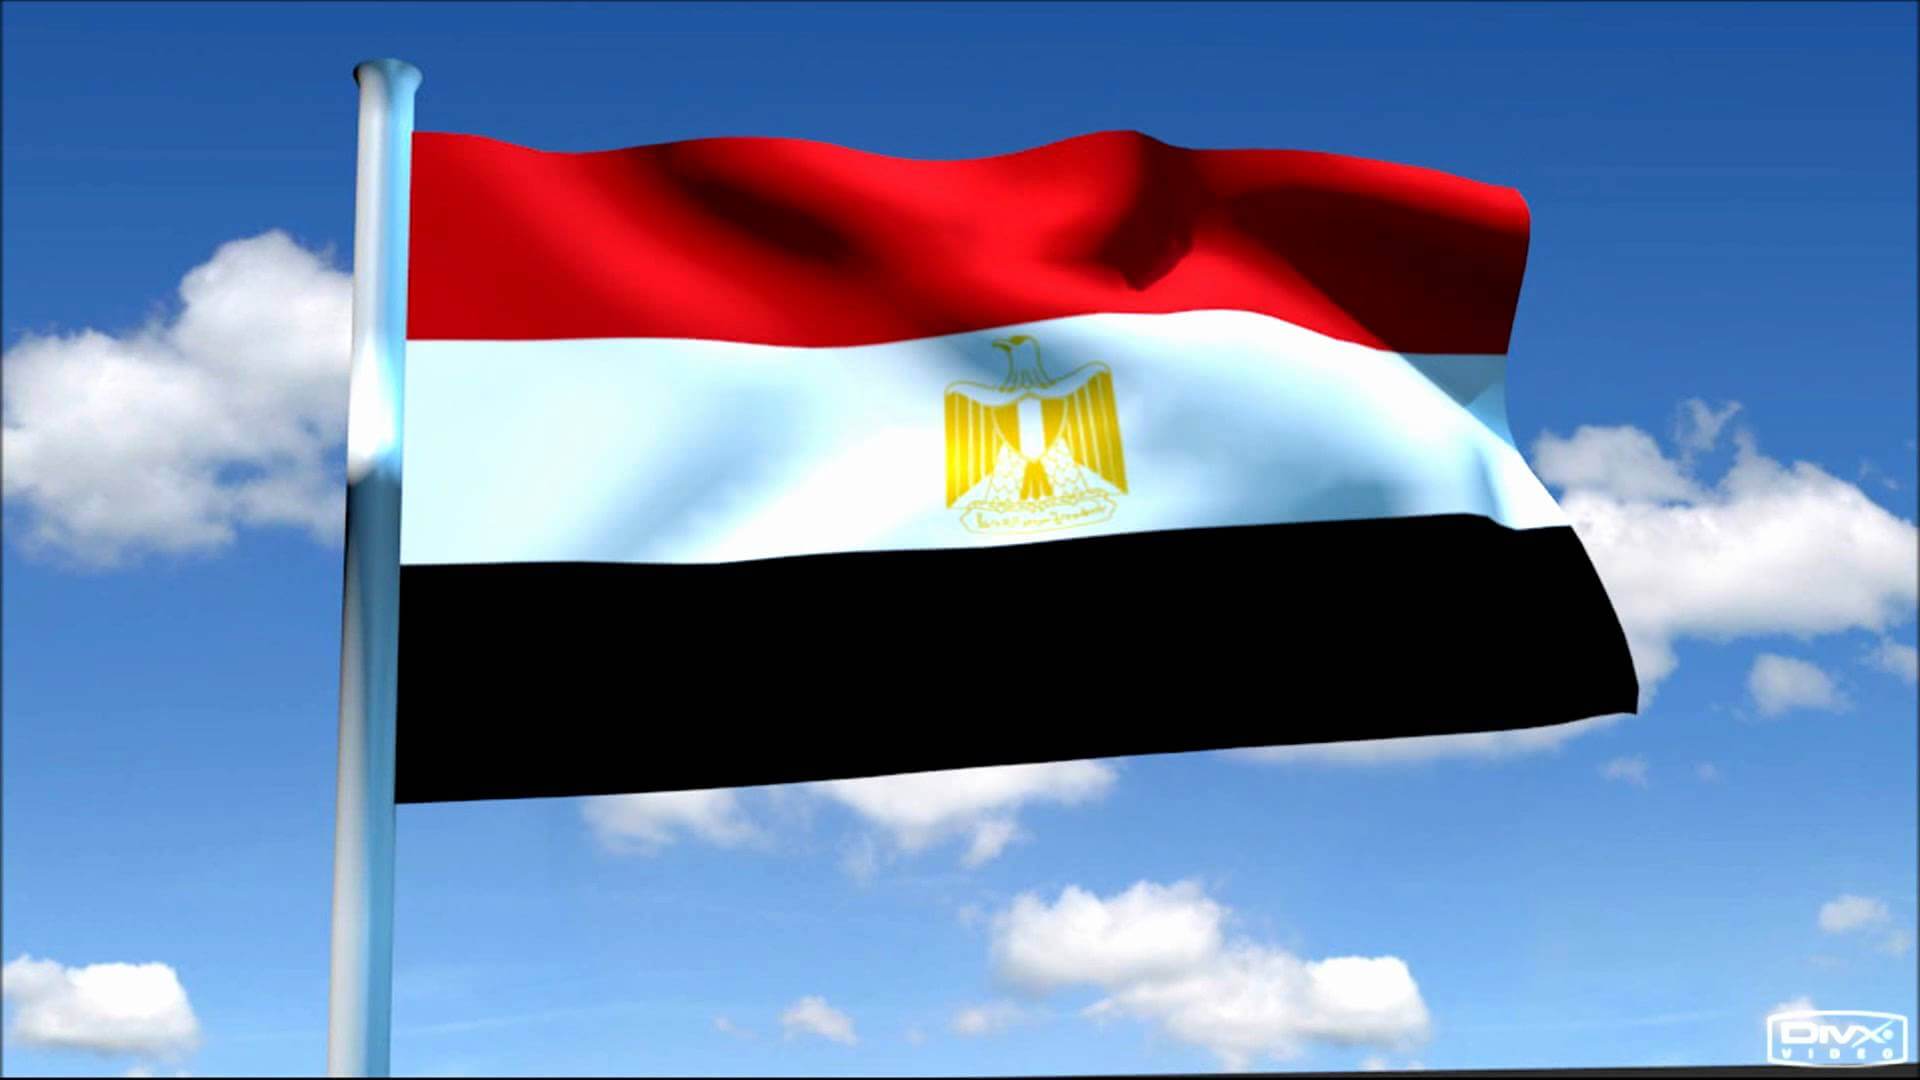 Egypt offers scholarships to South Sudan students